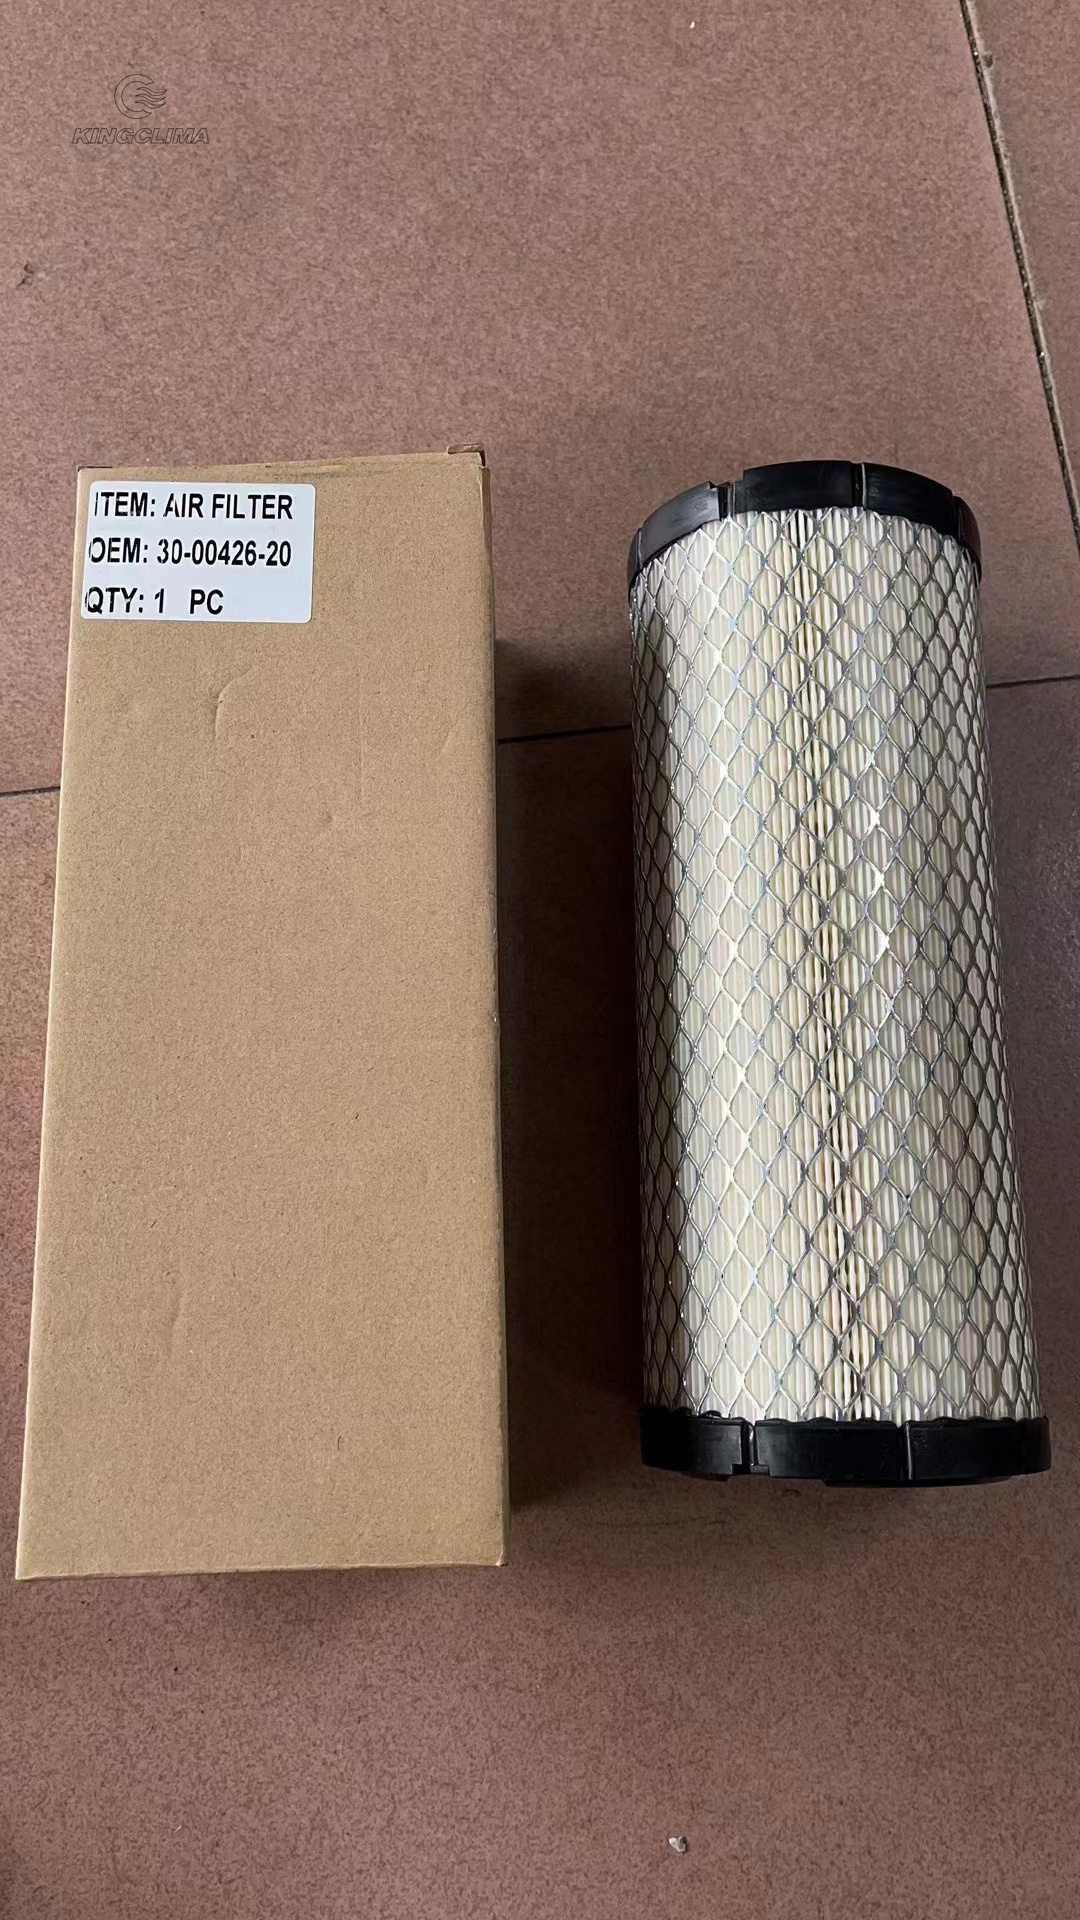 Carrier air filter 30-00426-20 parts